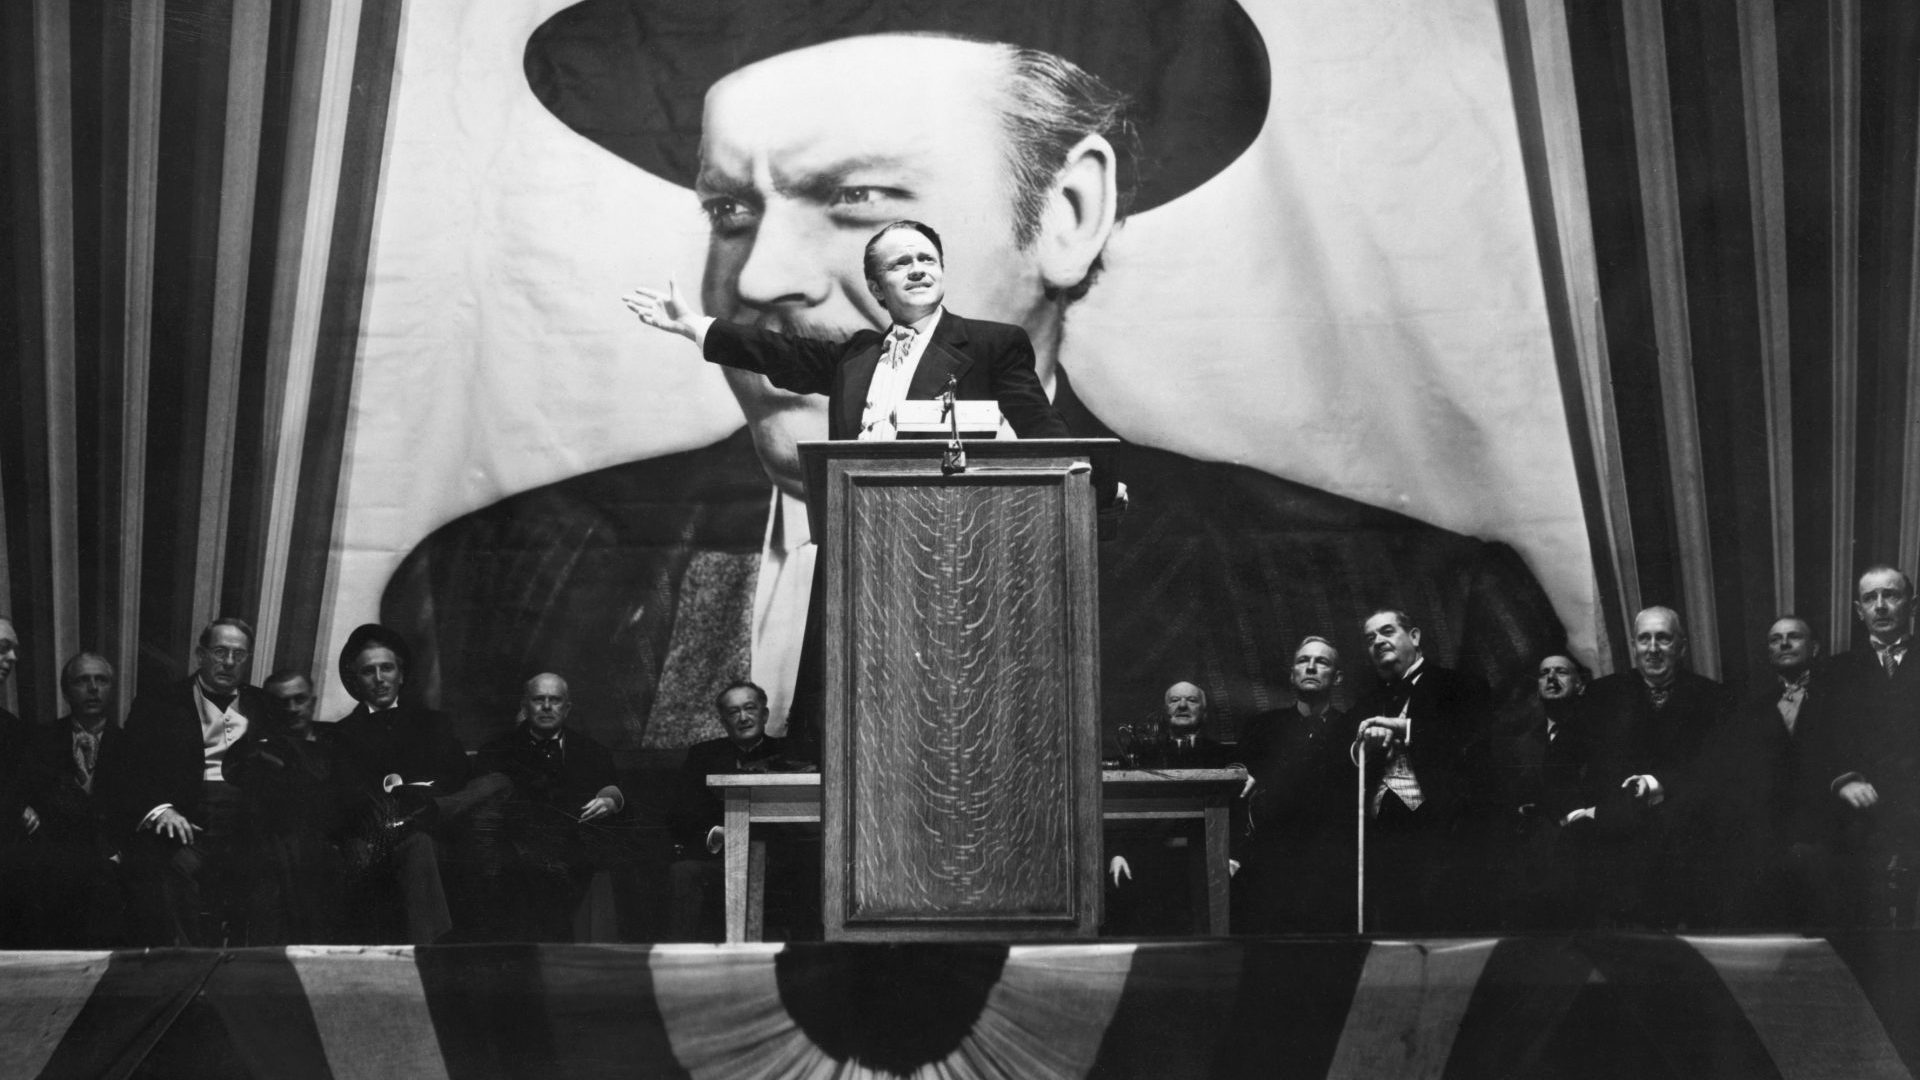 Charles Foster Kane (Orson Welles) makes a stirring campaign speech before a larger-than-life portrait of himself in a scene from Citizen Kane. Image: Bettmann